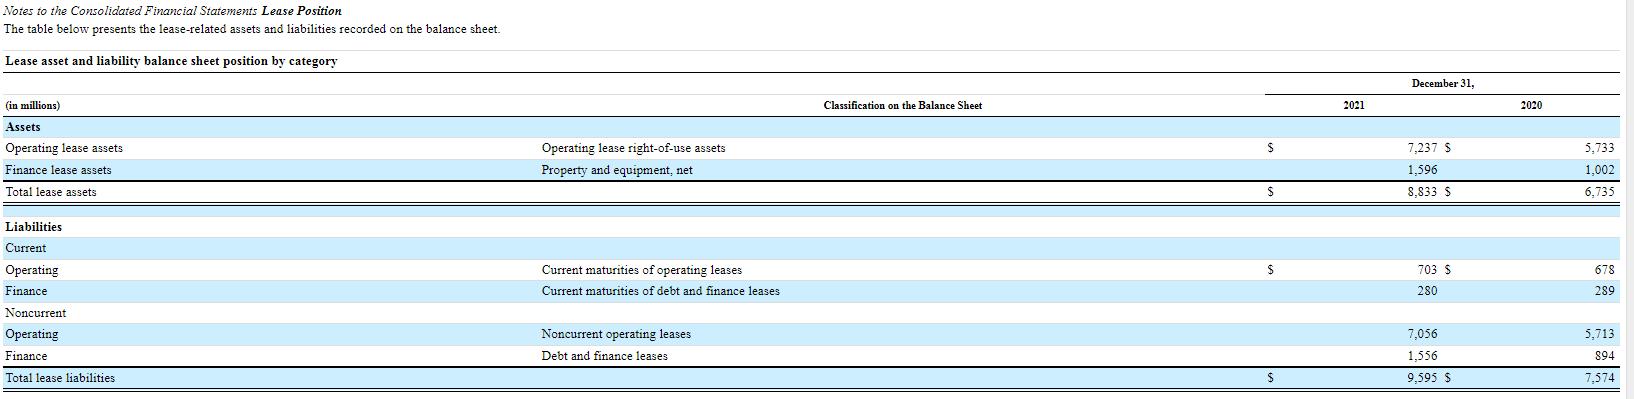 Notes to the Consolidated Financial Statements Lease Position The table below presents the lease-related assets and liabiliti